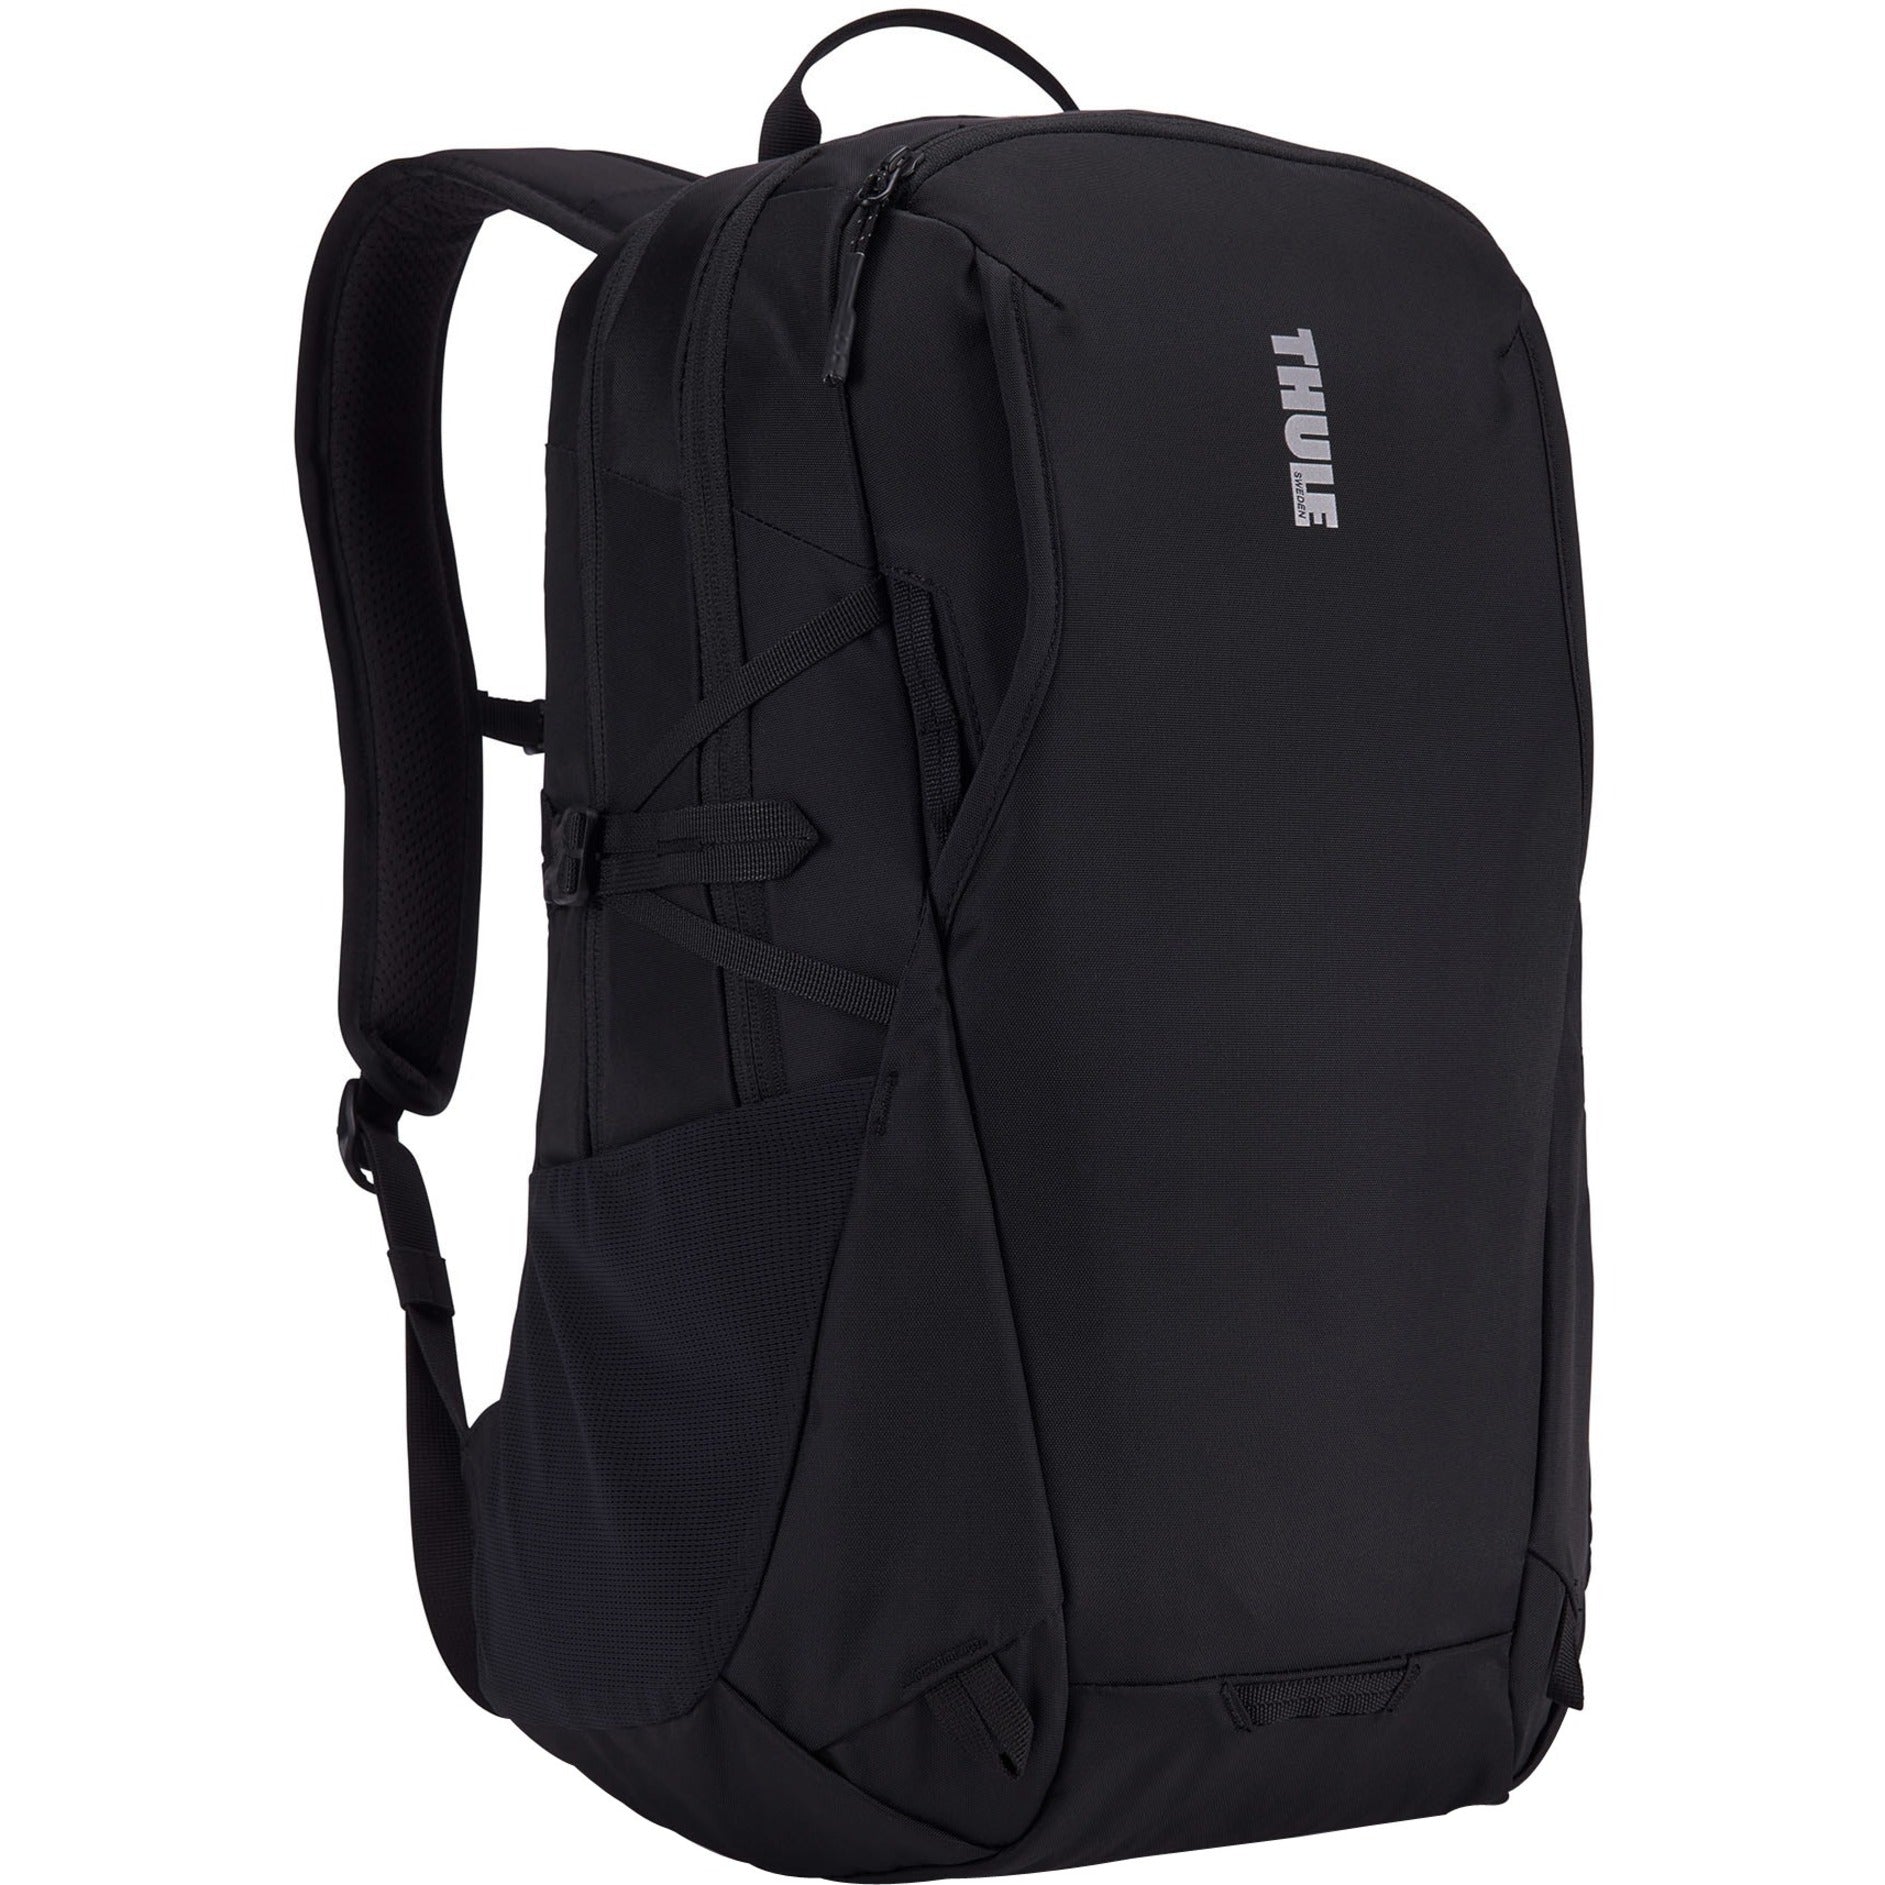 Thule 3204841 Enroute Backpack 23l Black, Carrying Case for Notebook, Tablet, Smartphone